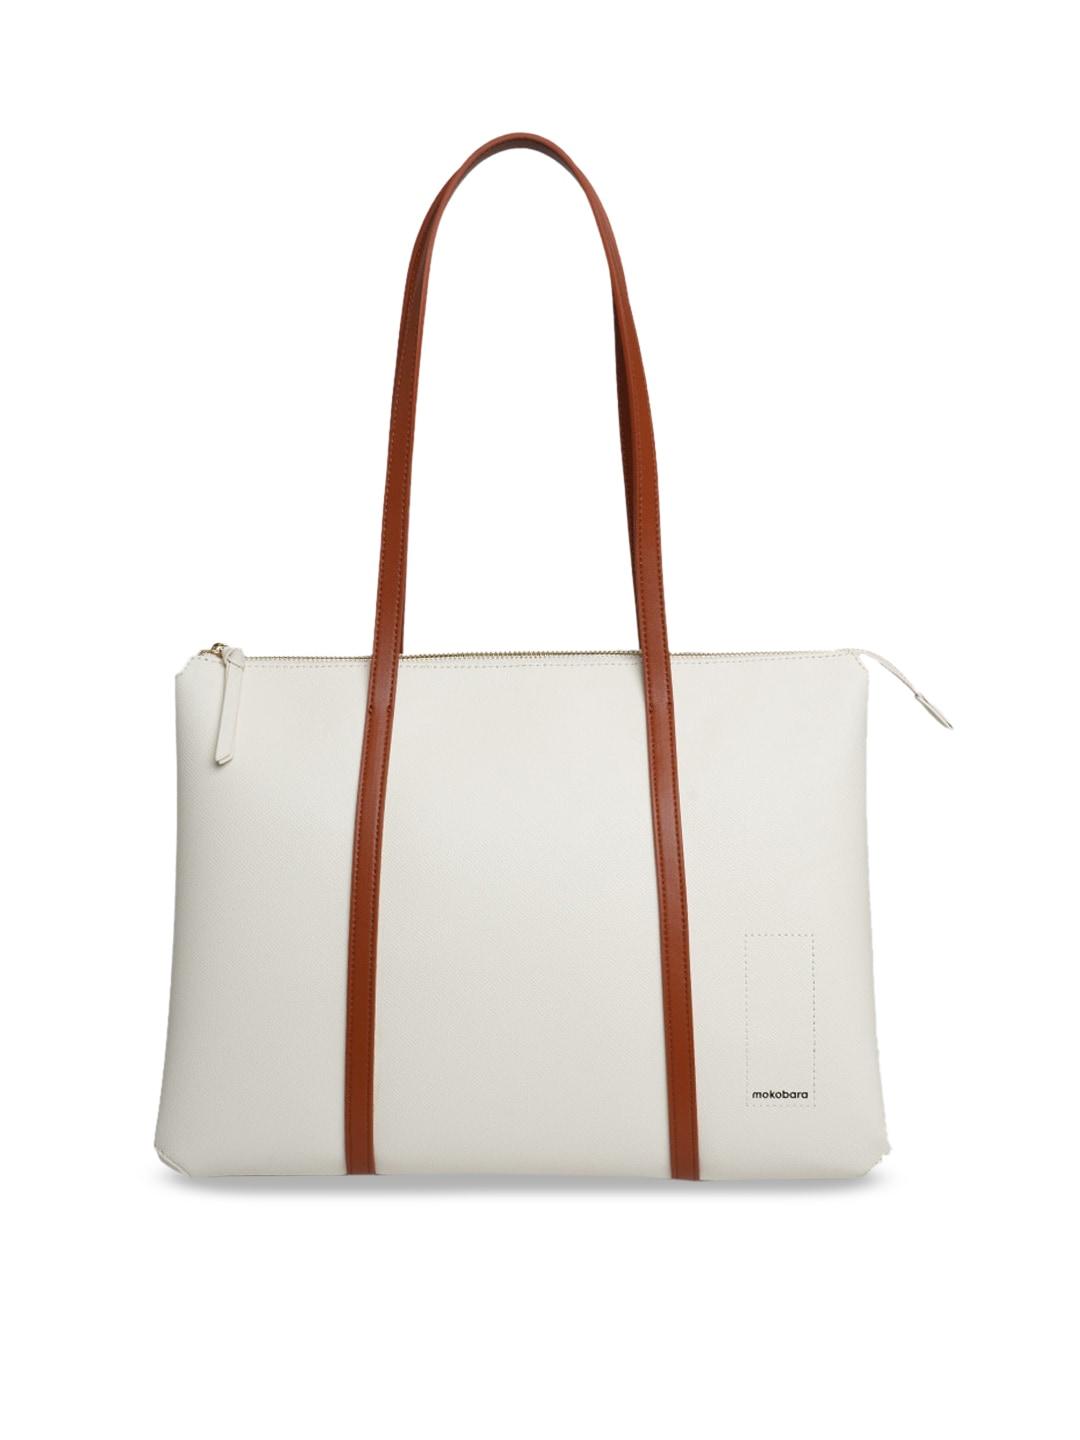 mokobara textured leather structured tote bag